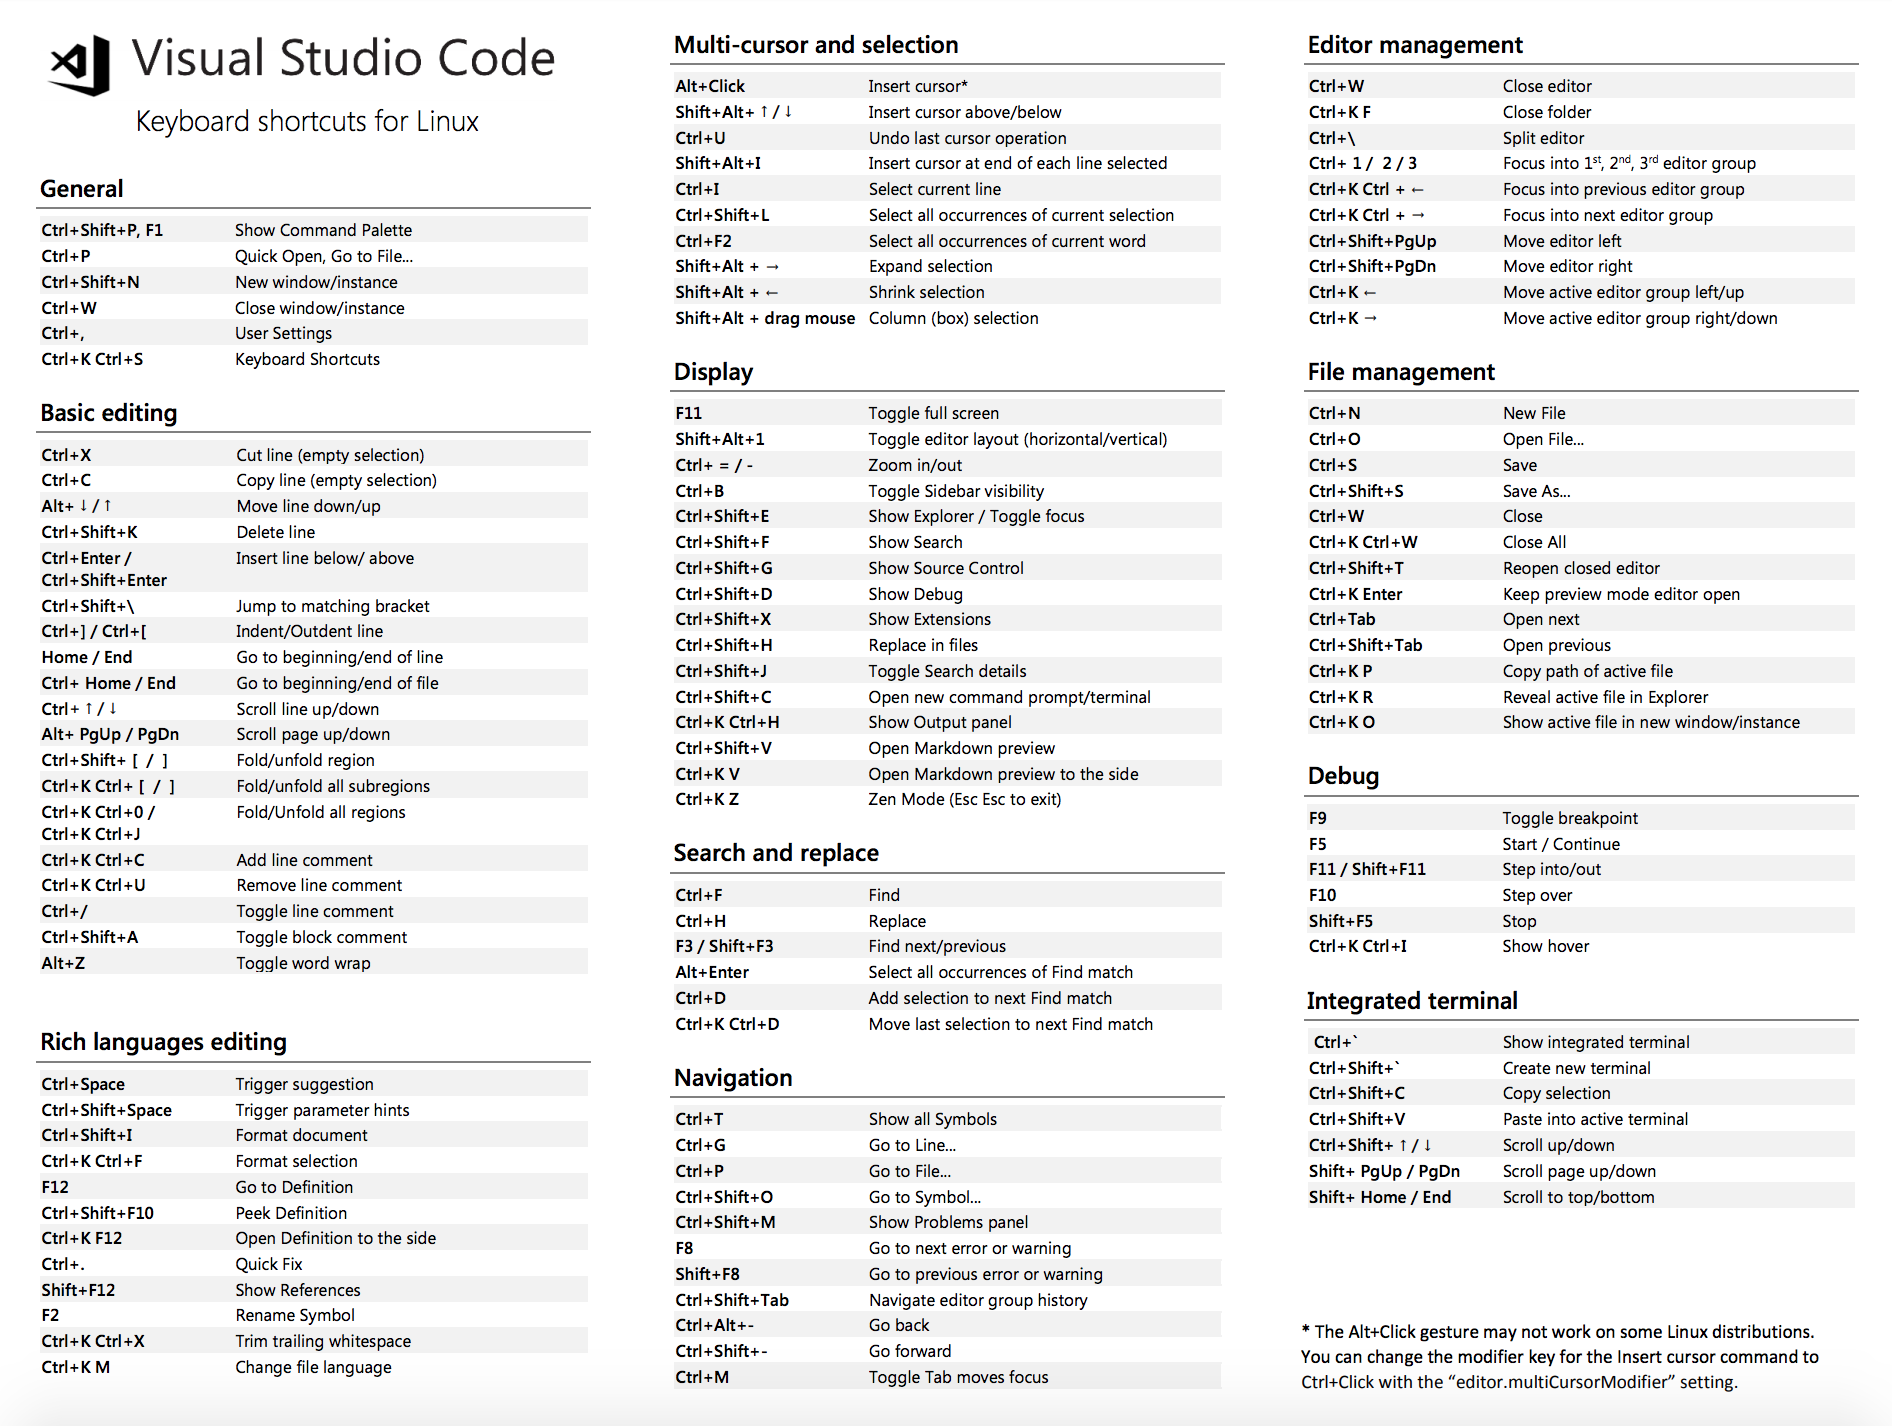 shortcuts for comment in visual studio in mac